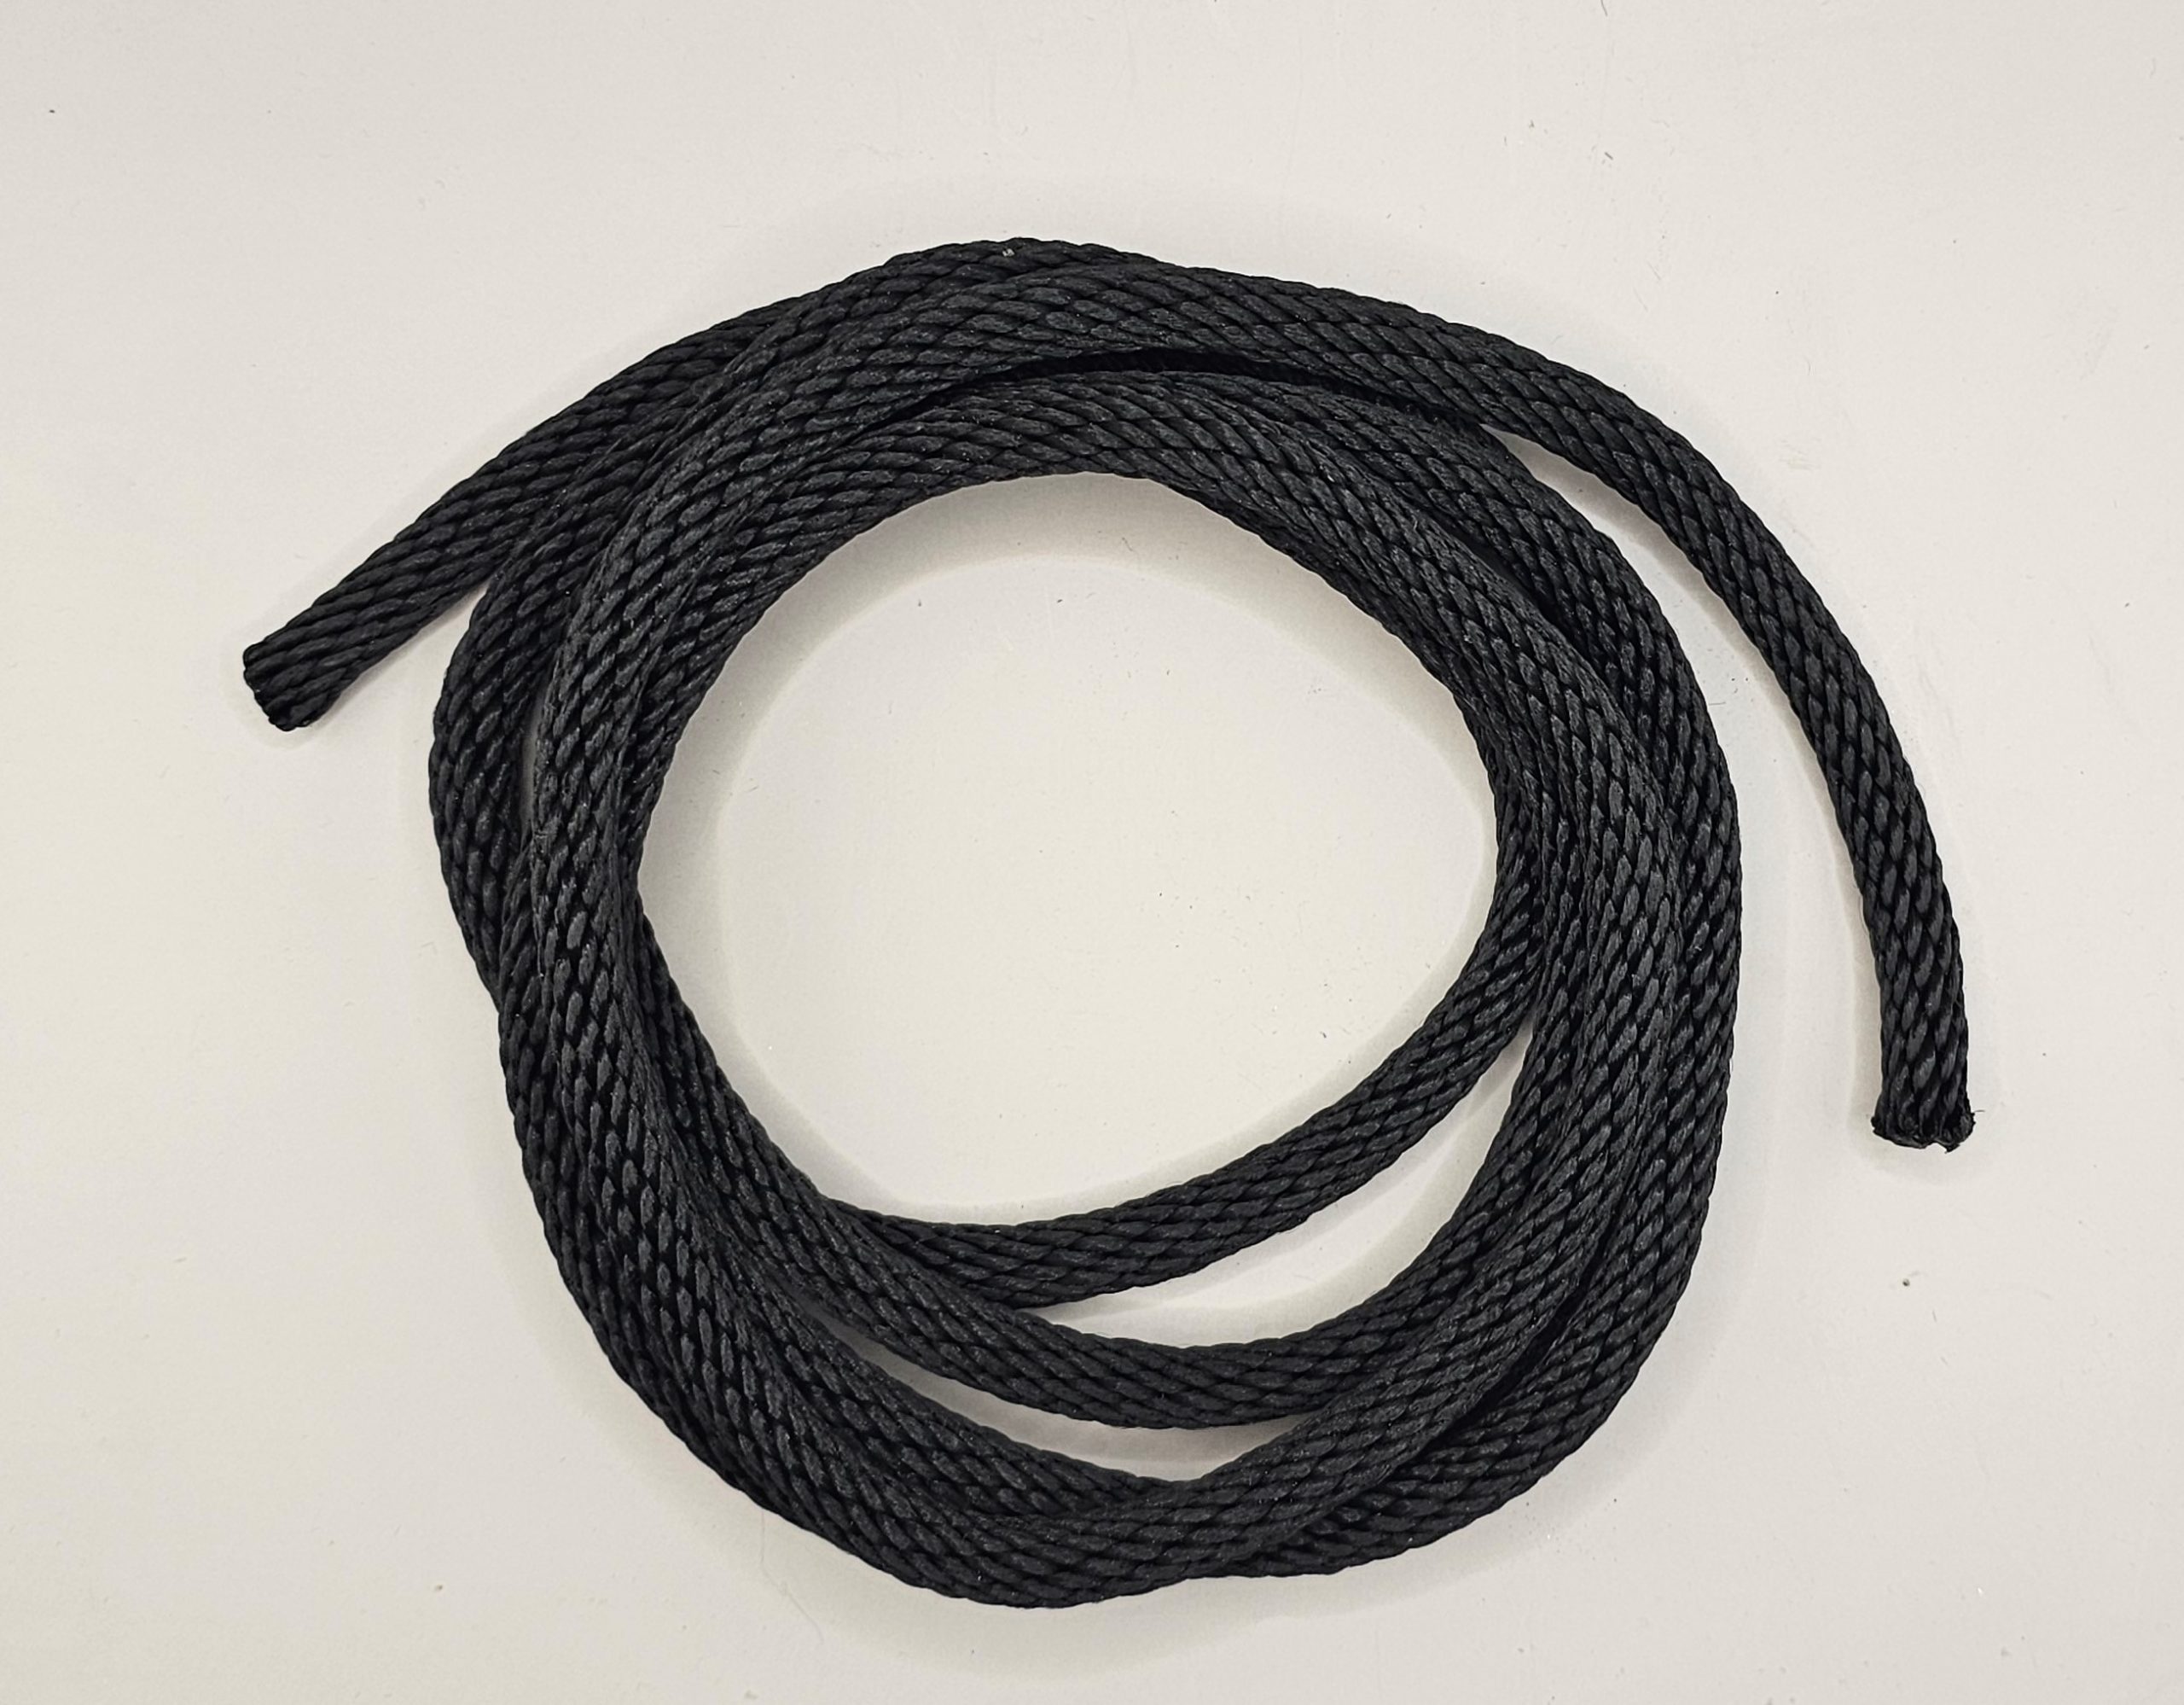 8ft rope Image